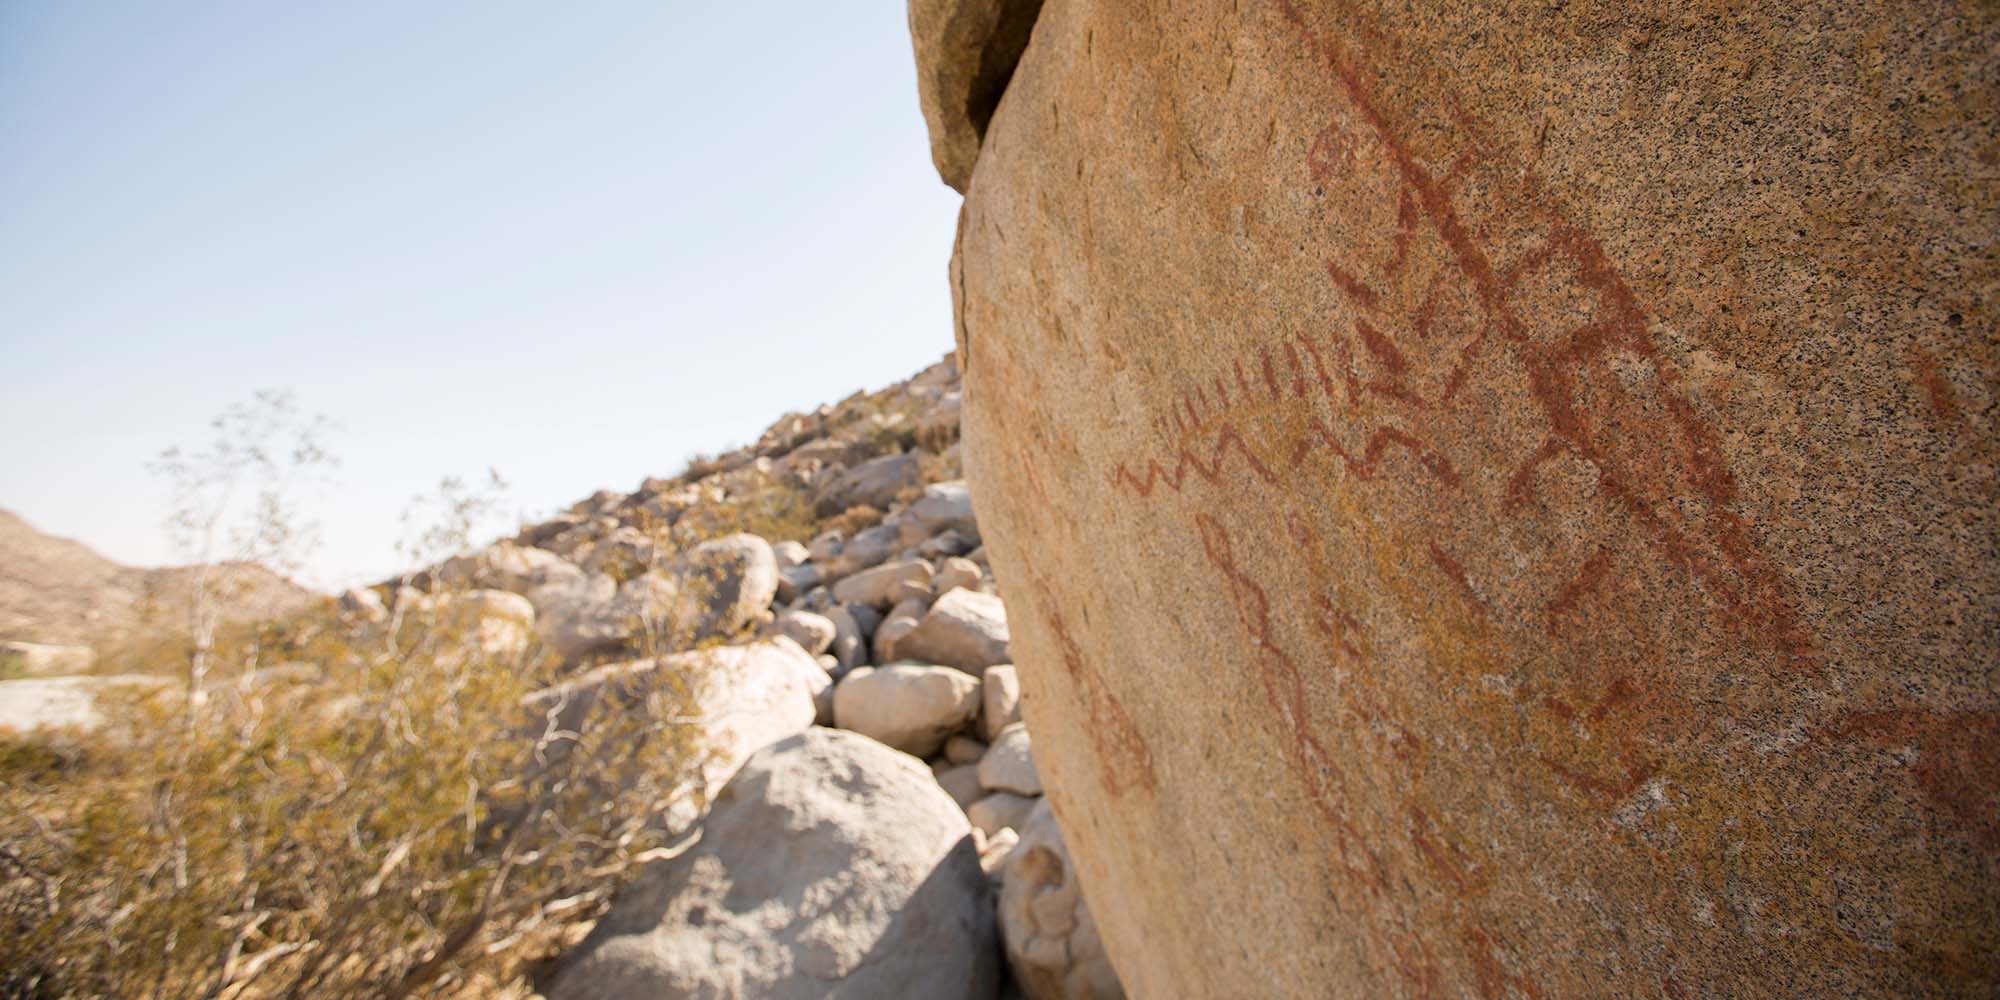 View of Native American Pictographs in Anza Borrego State Park.